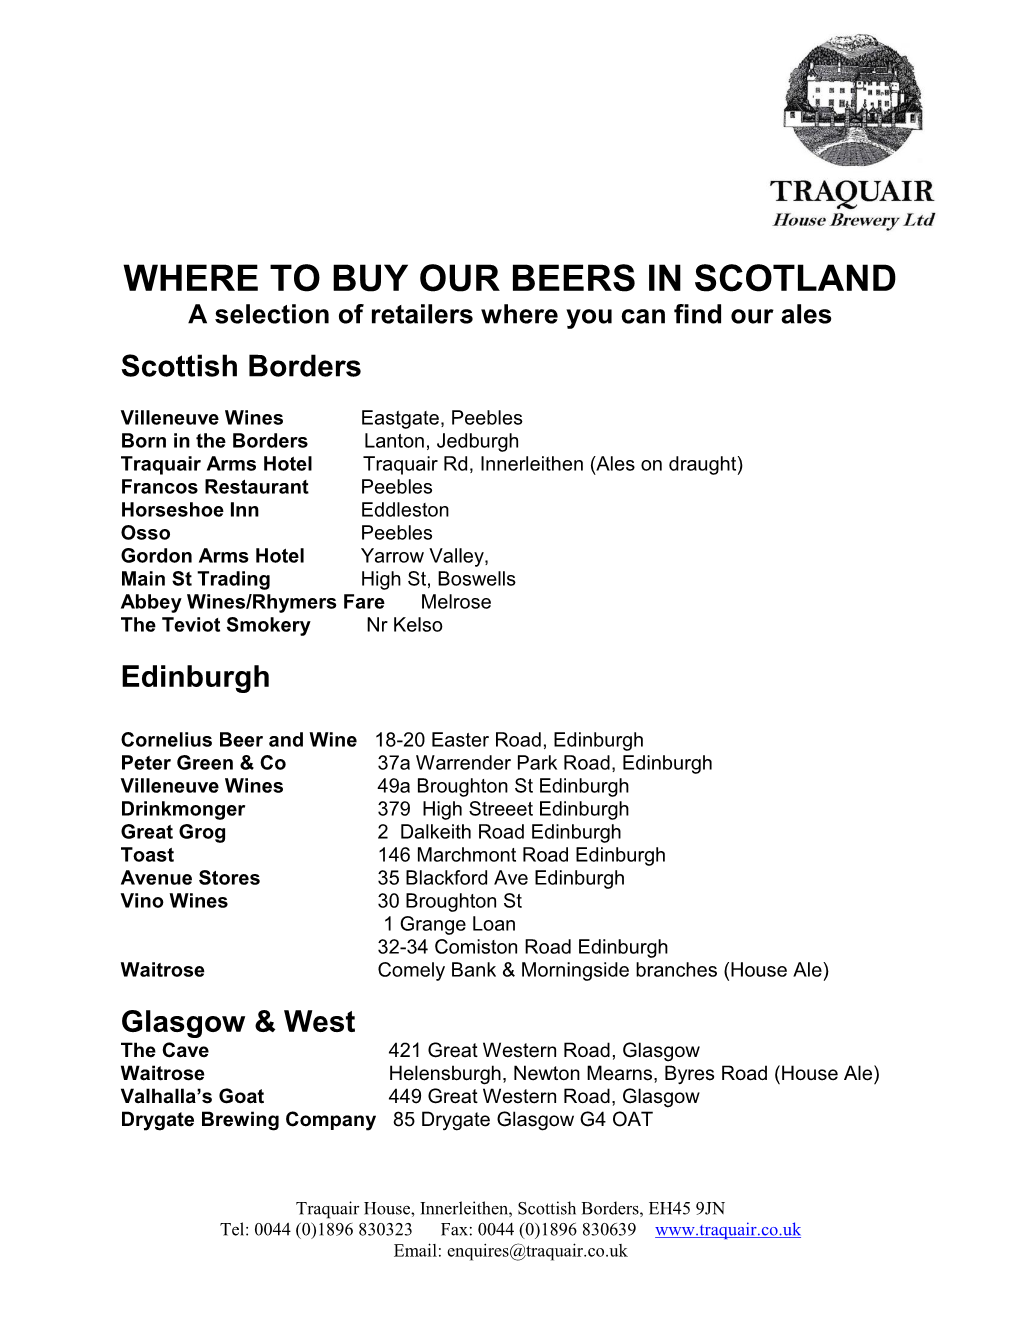 WHERE to BUY OUR BEERS in SCOTLAND a Selection of Retailers Where You Can Find Our Ales